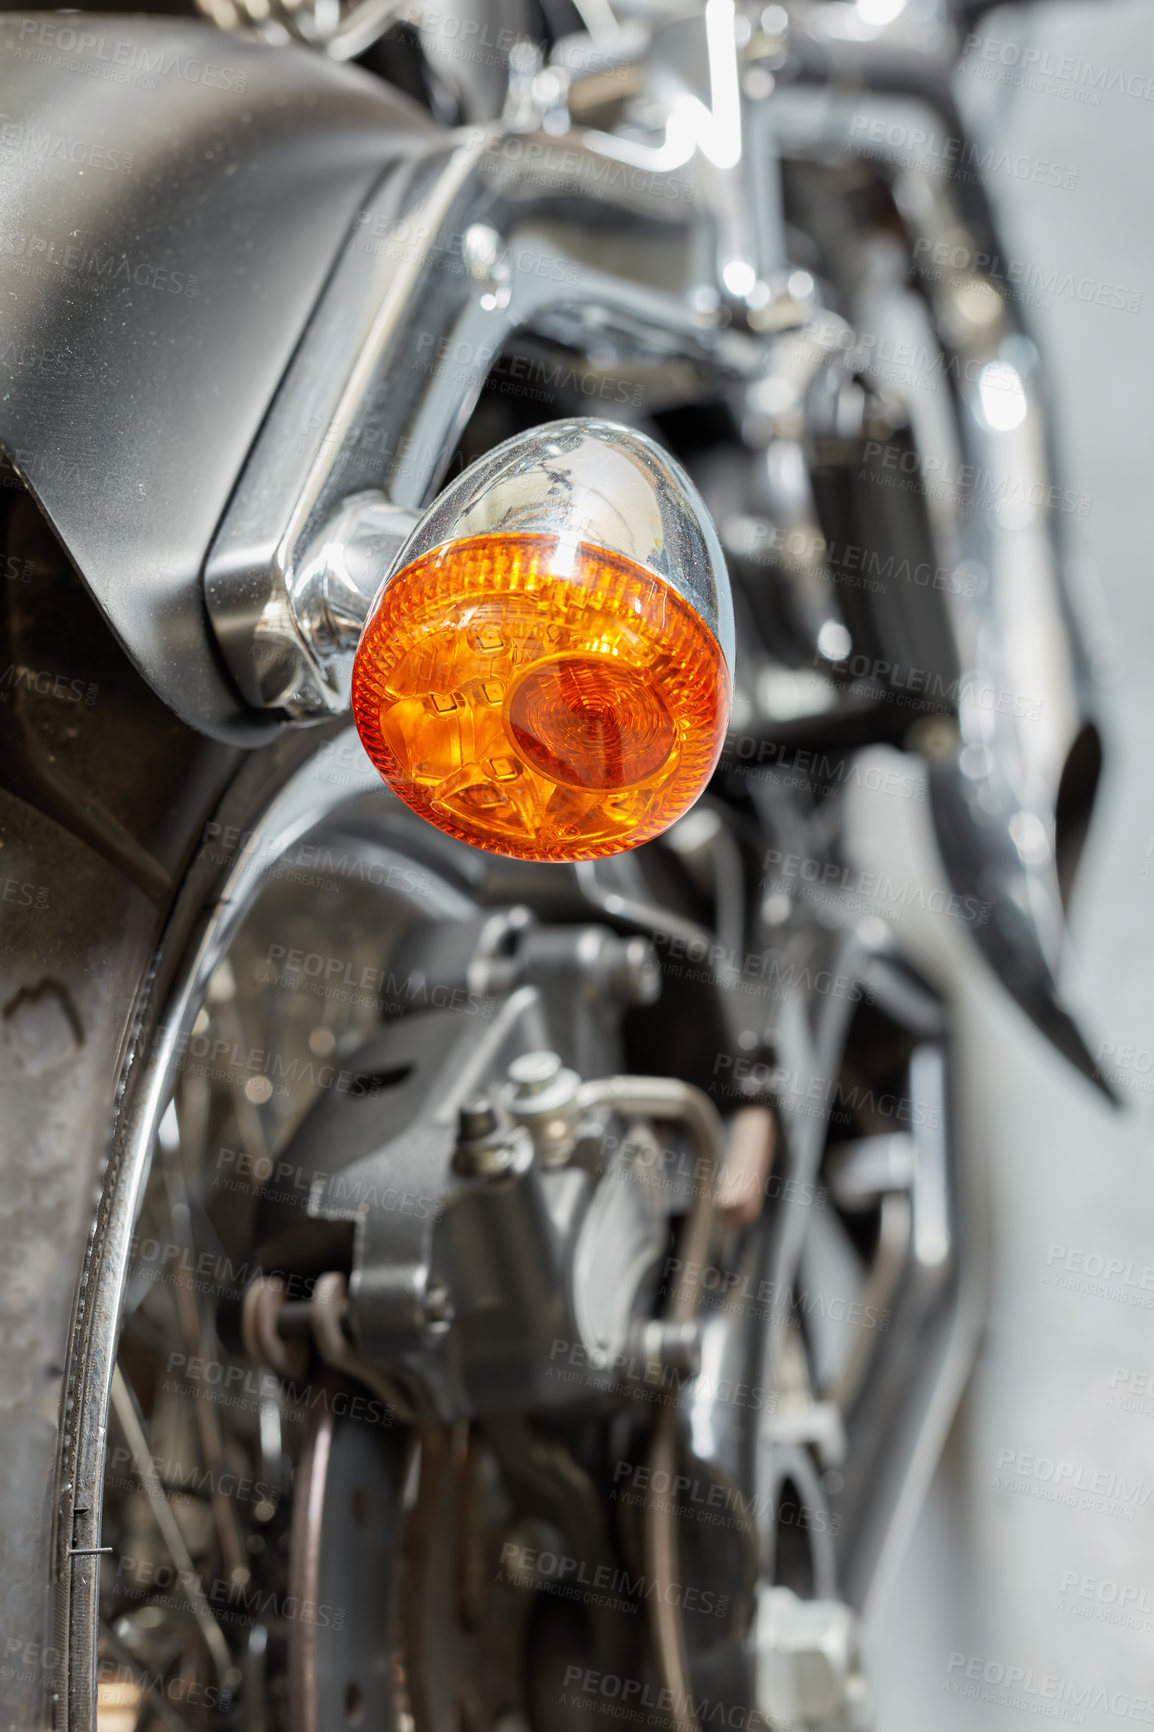 Buy stock photo An orange turning light, signal and indicator on a shiny black motorbike. Closeup detailed texture of warning bulb used for road safety, precaution when riding on a highway or street. Safe motorists